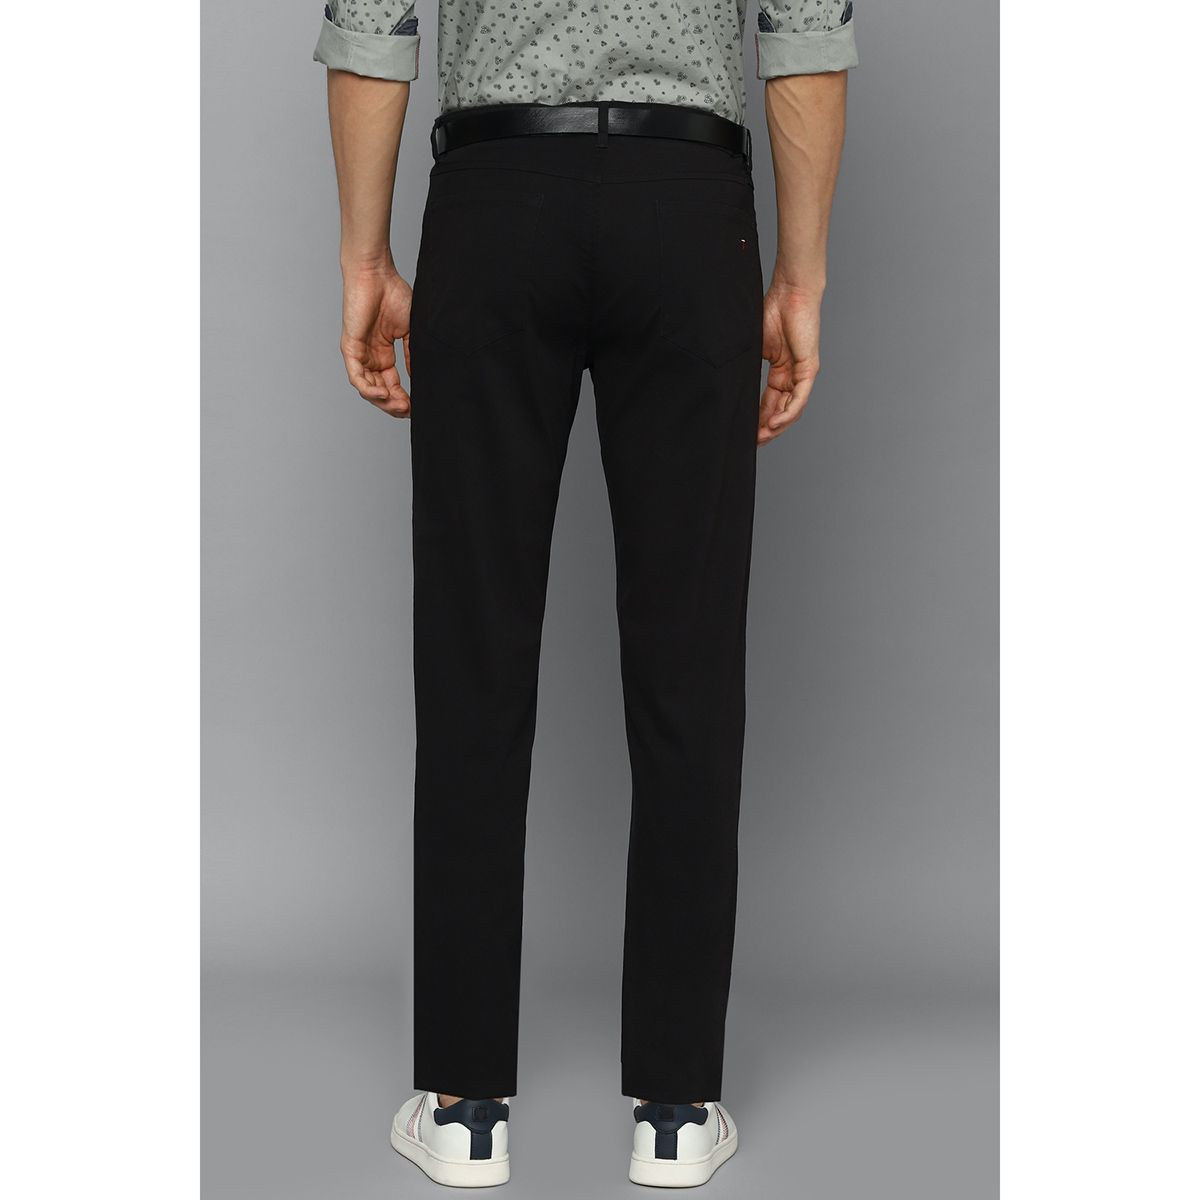 Louis Philippe Casual Trousers  Buy Louis Philippe Men Grey Slim Fit  Textured Flat Front Casual Trousers Online  Nykaa Fashion